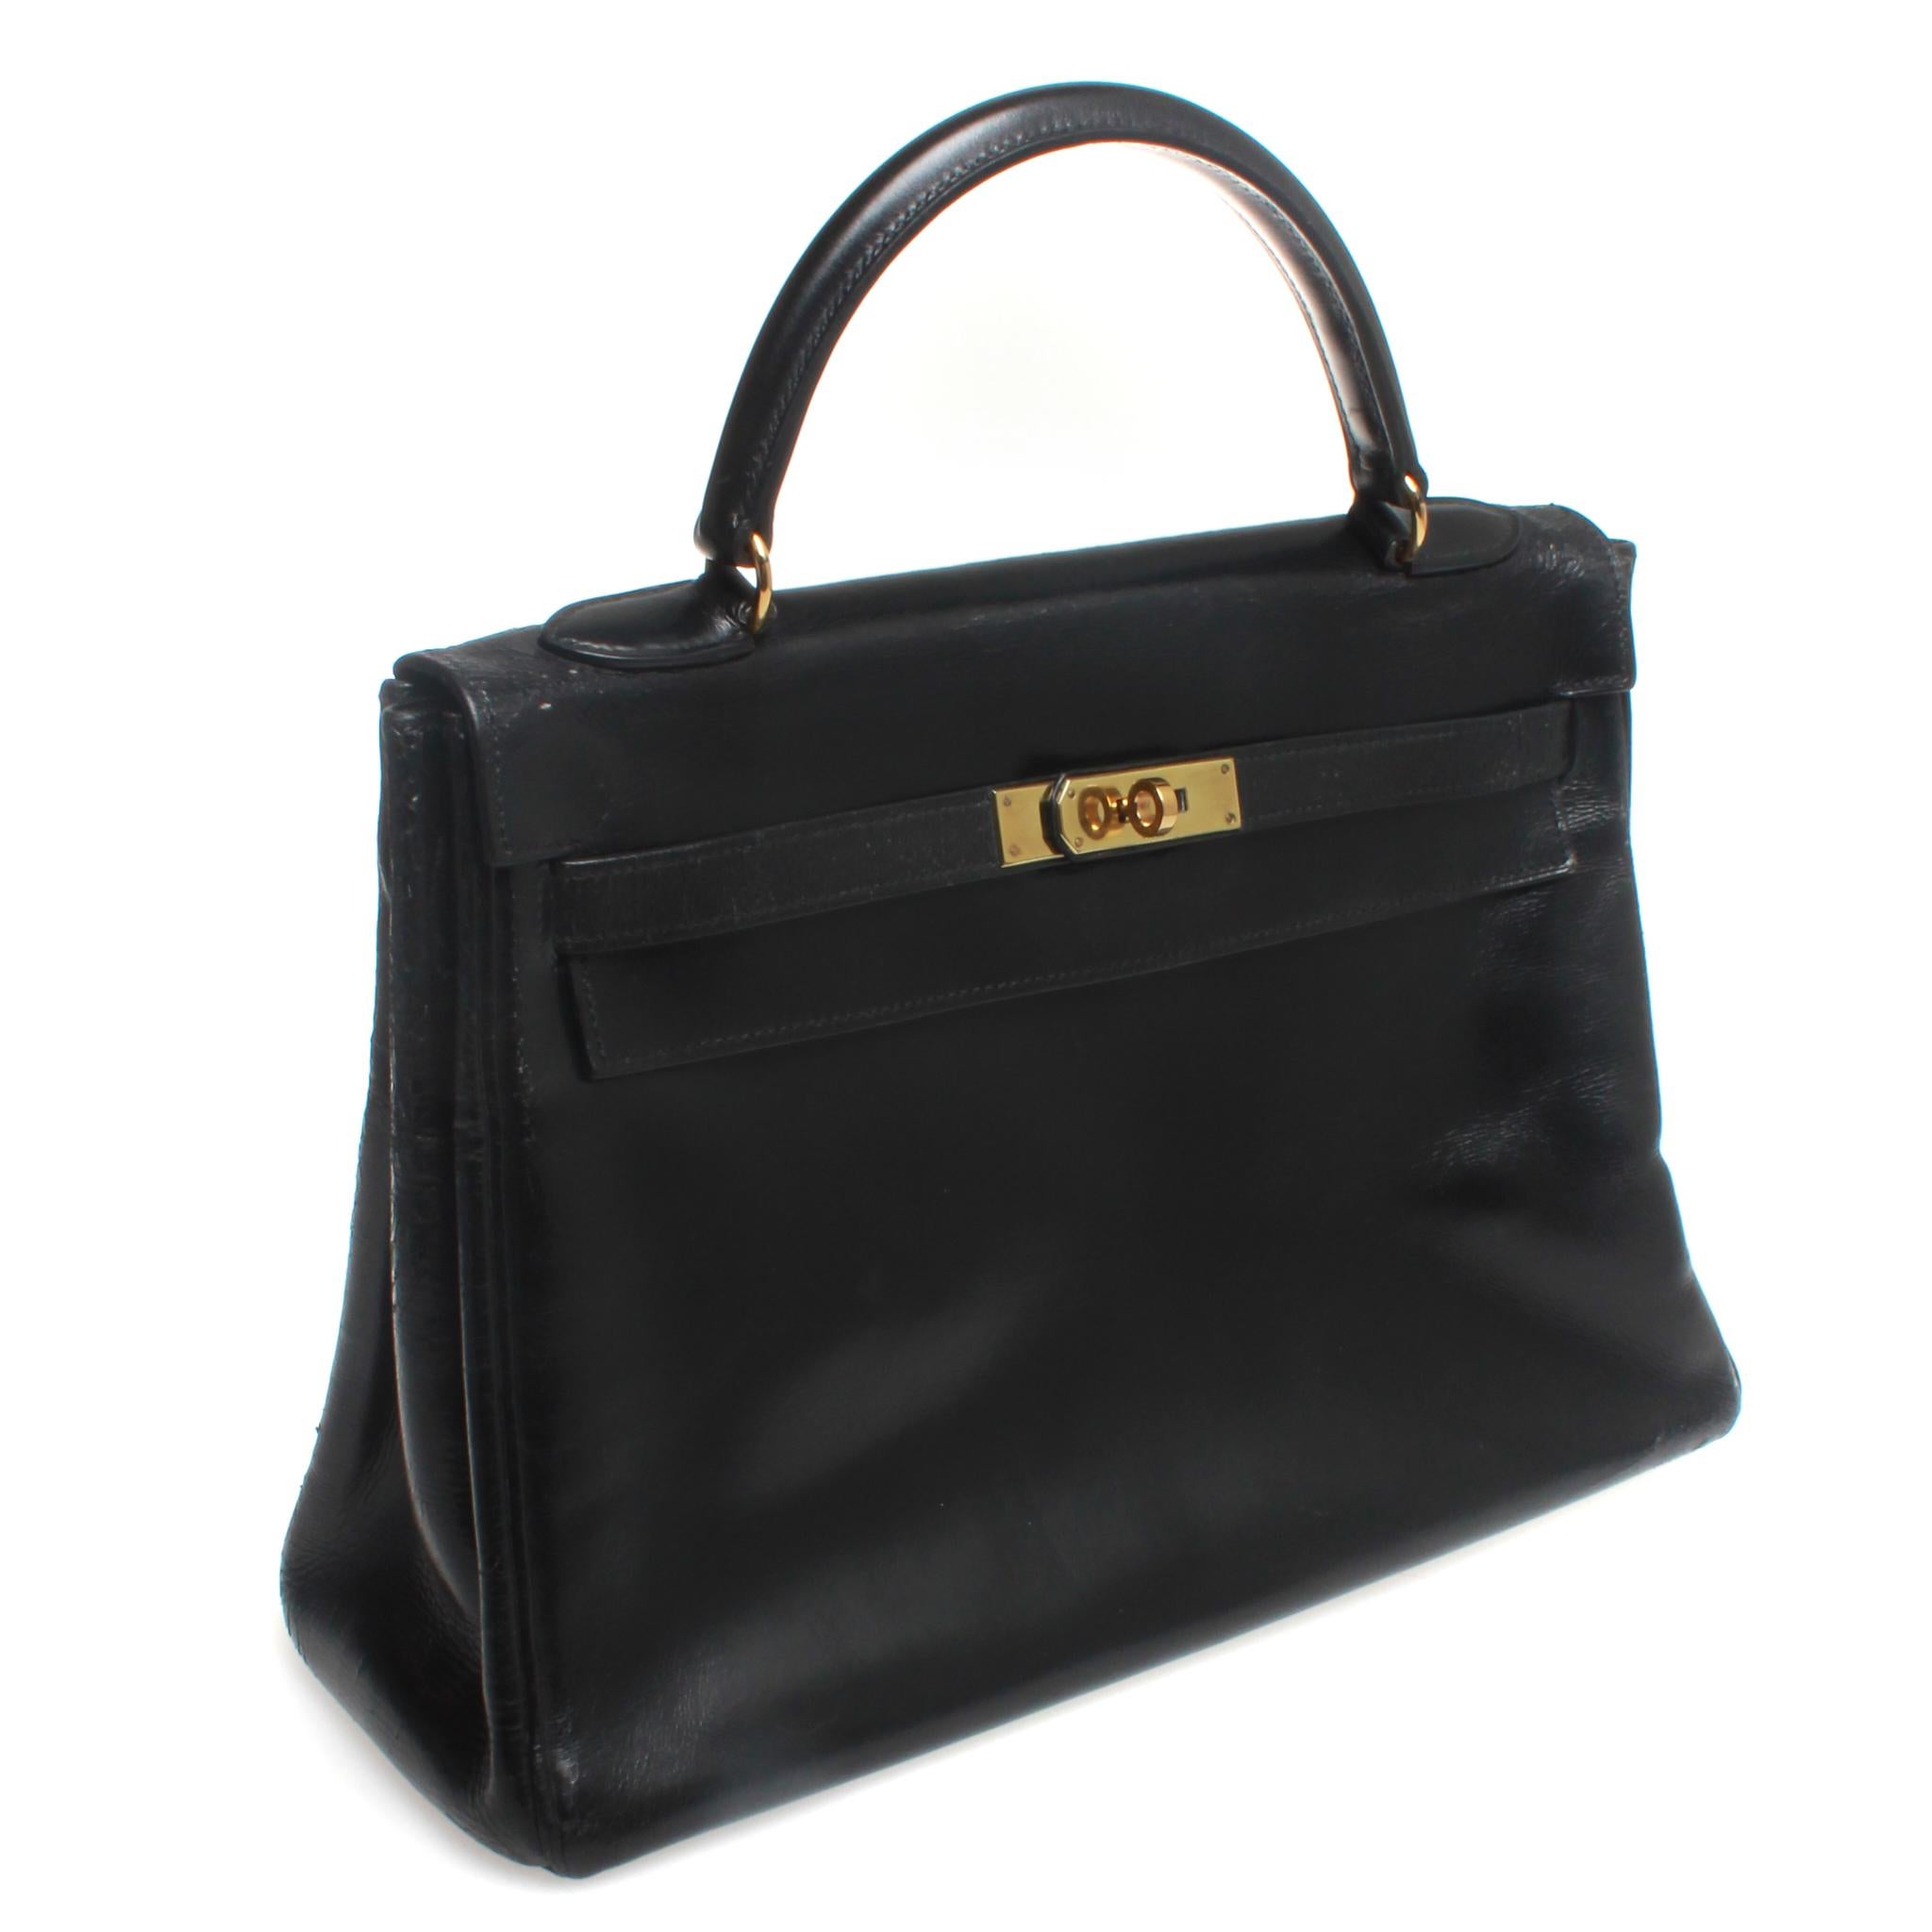 Hermes Kelly 1969, 32, Black with Padlock and Dust Covers - Black Box Calf Leather with Gold Hardware Purchased from Didier Ludot ( renowned Vintage seller in Paris ) Refurbed by Hermes Paris in 2013. In good Vintage condition Comes with Key,